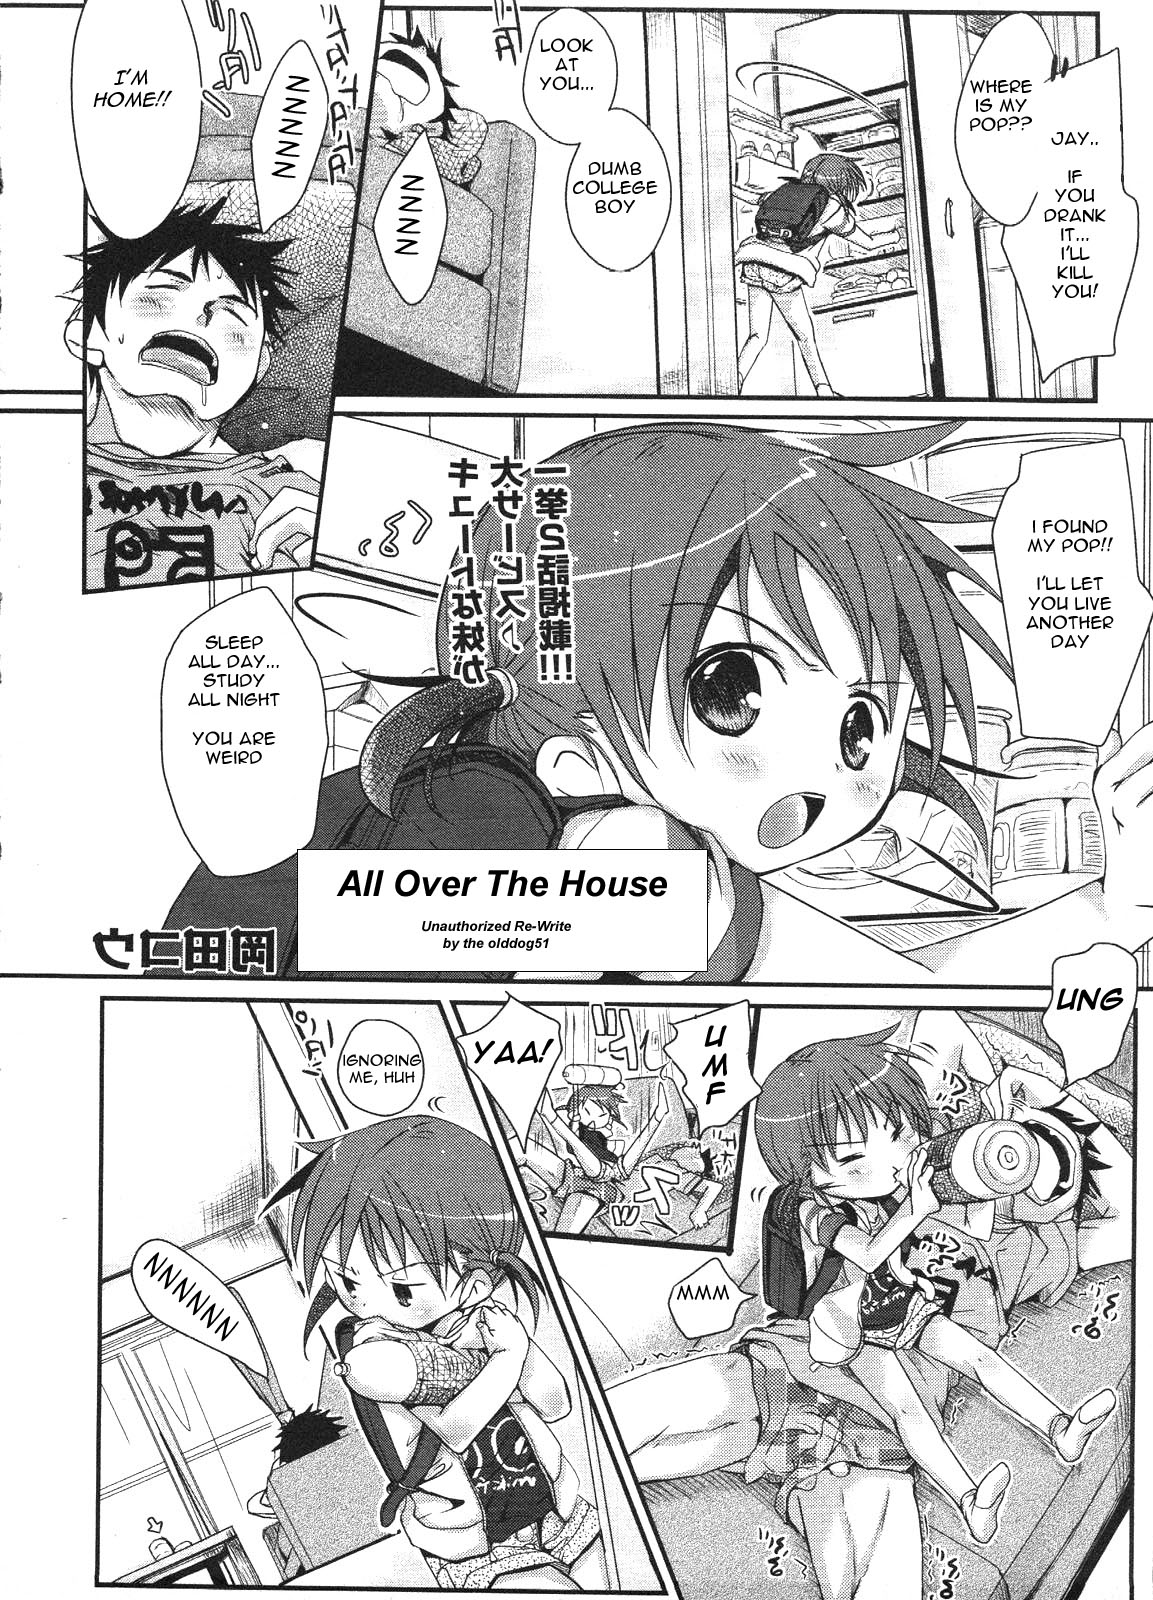 All Over The House [English] [Rewrite] [olddog51] page 1 full